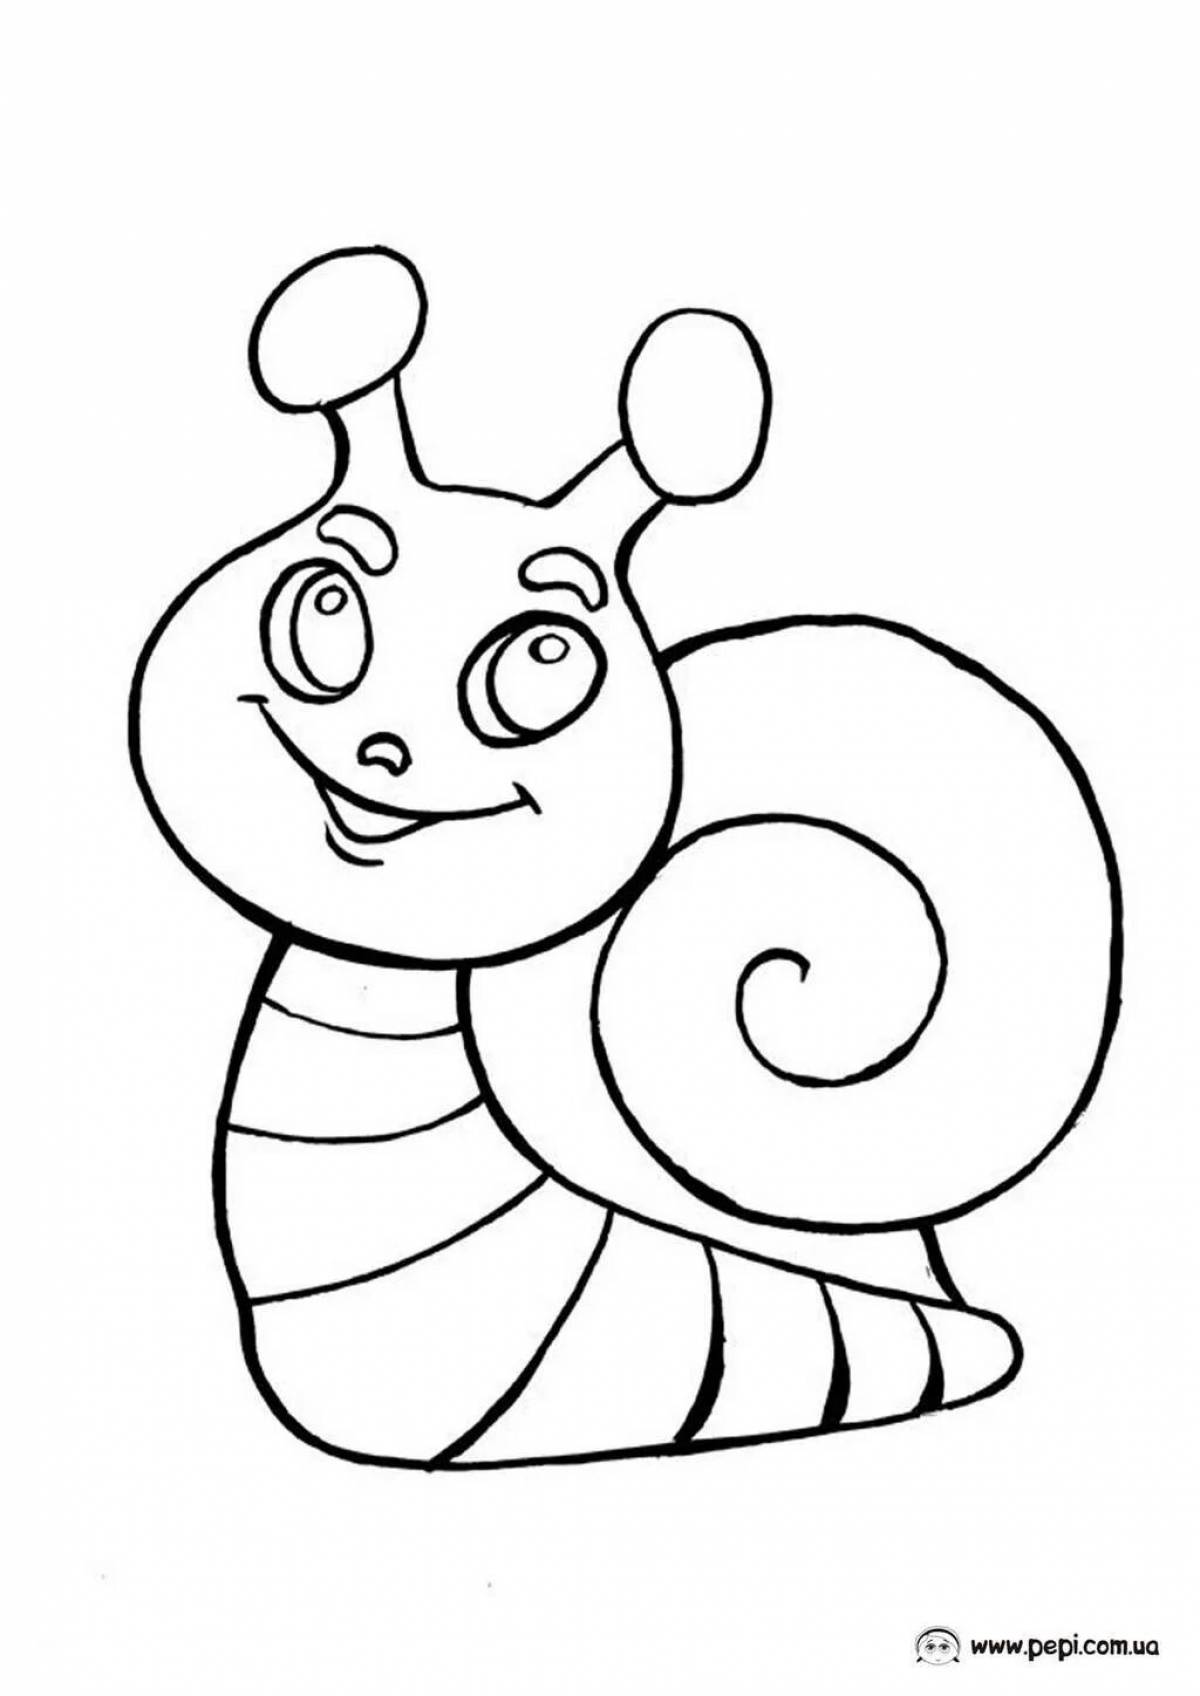 Colouring snail for children 3-4 years old